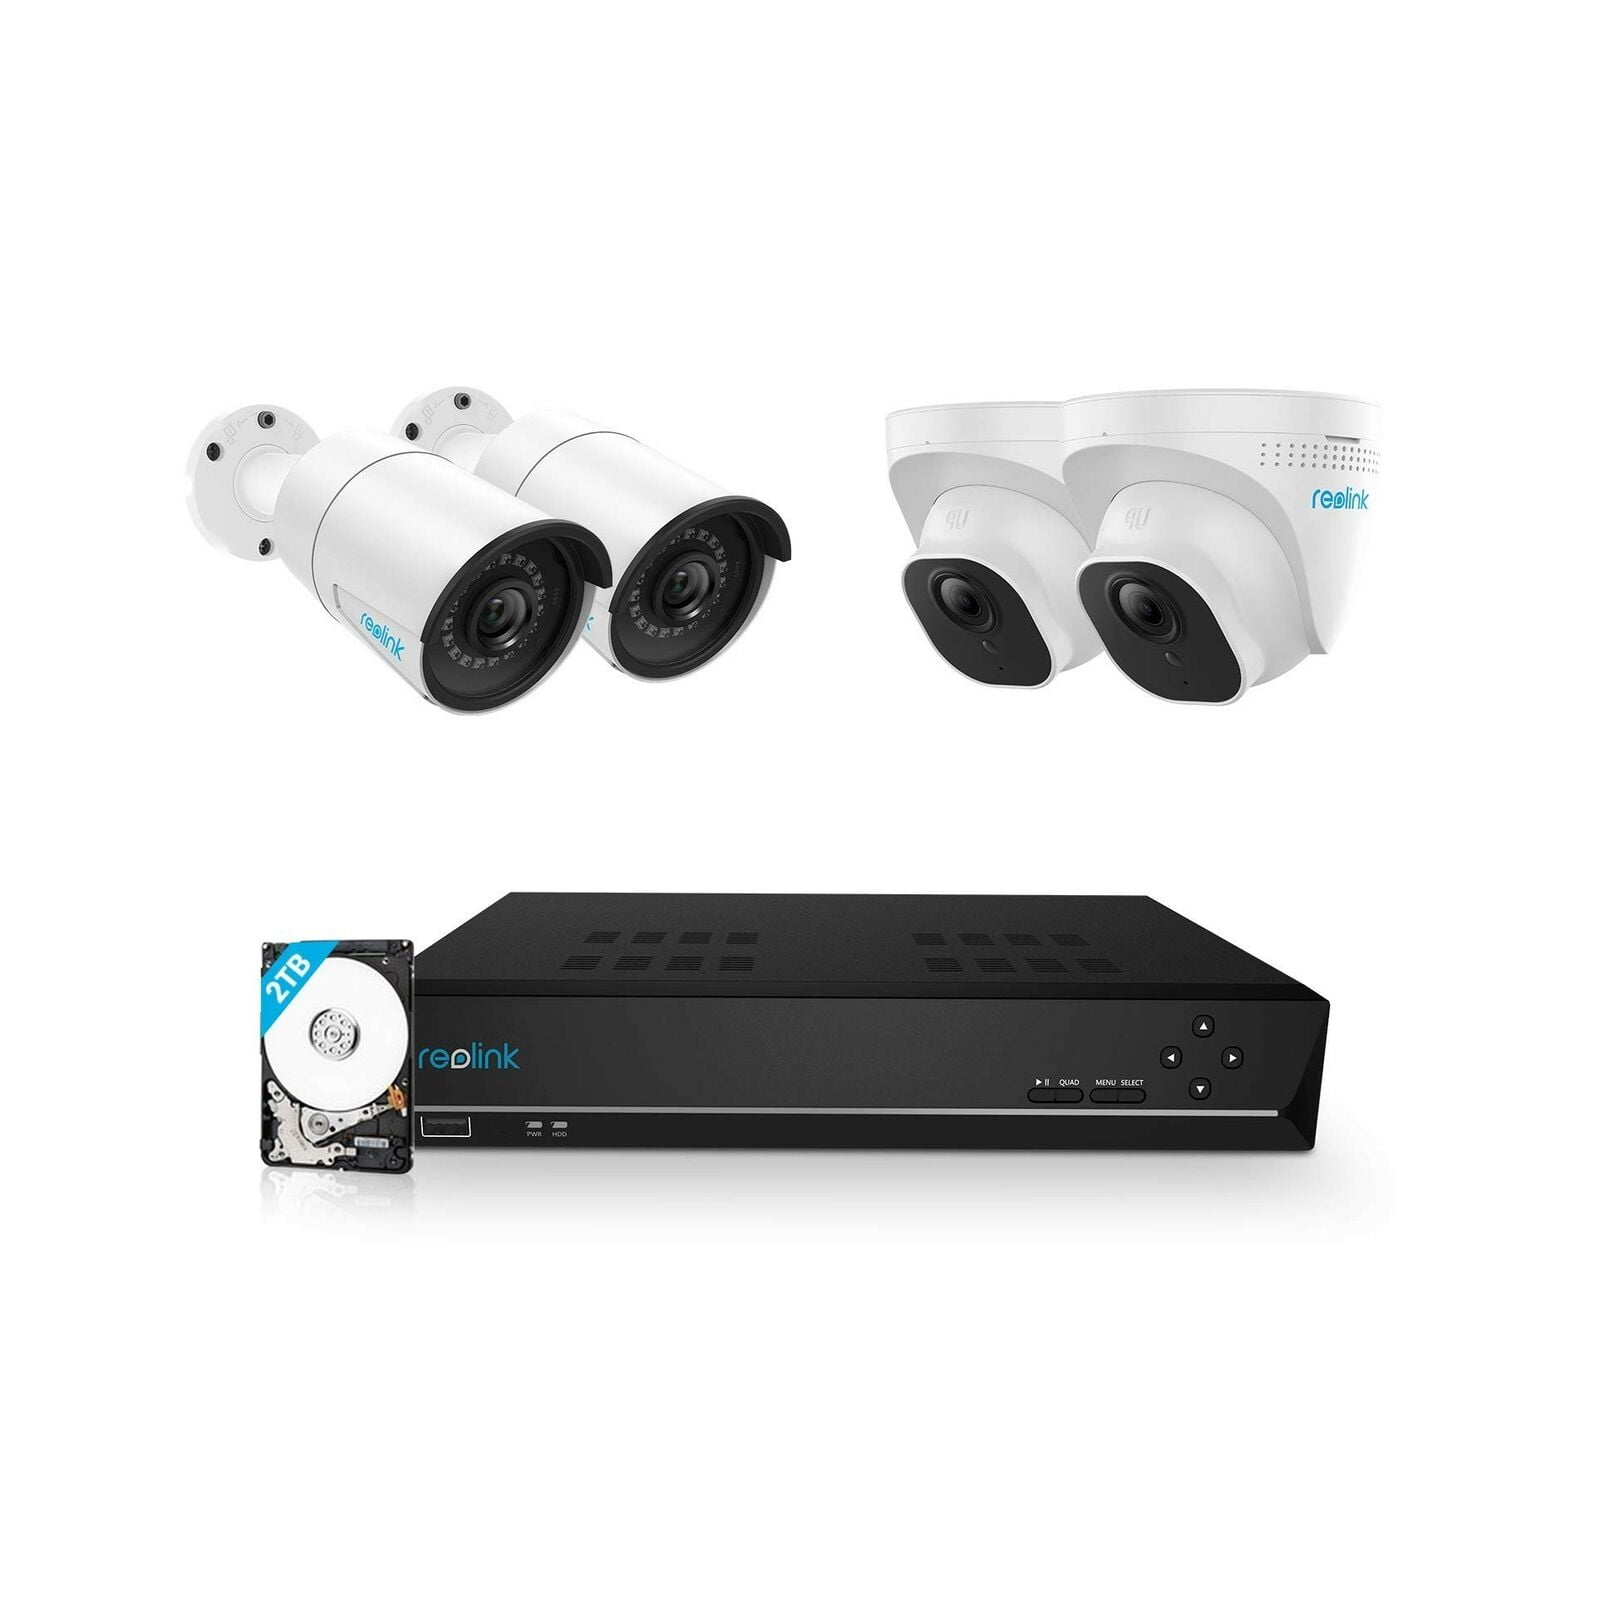 Reolink 8CH PoE NVR Work with Reolink 8MP/5MP/4MP HD Cameras for 24/7 Surveillance DIY IP Home Security Camera System Support Audio NO Pre-Installed HDD